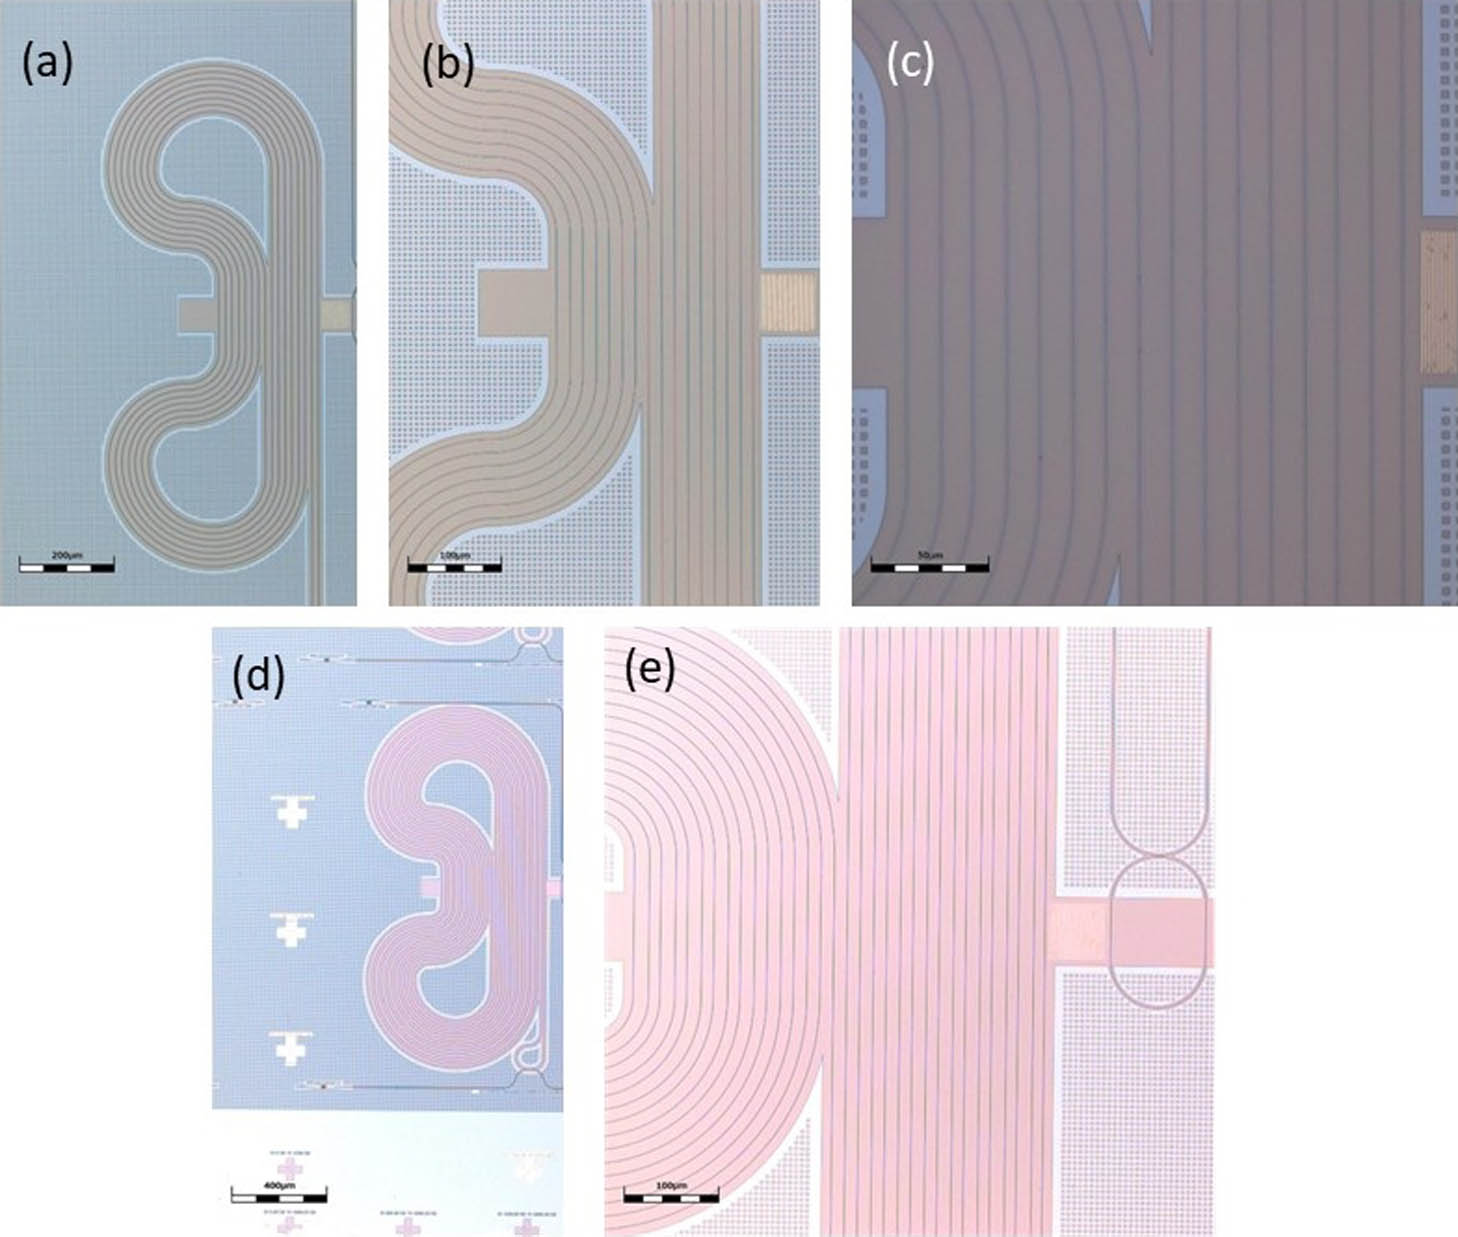 (a)–(c) Top-view optical microscope images of a 16-tap SAW-photonic MWP filter device. Scale bars correspond to 200 μm, 100 μm, and 50 μm in the three panels, respectively. A square grating of gold stripes is deposited to the right of a long resonator waveguide. The resonator layout consists of 16 straight sections that run parallel to the grating stripes. (d), (e) Top-view optical microscope images of a 32-tap SAW-photonic MWP filter device. Scale bars correspond to 400 μm and 100 μm, respectively. A grating coupler for optical input can be seen at the end of a bus waveguide in the lower left corner of panel (d). A two-tap device to the right of the metallic grating is seen in panel (e).